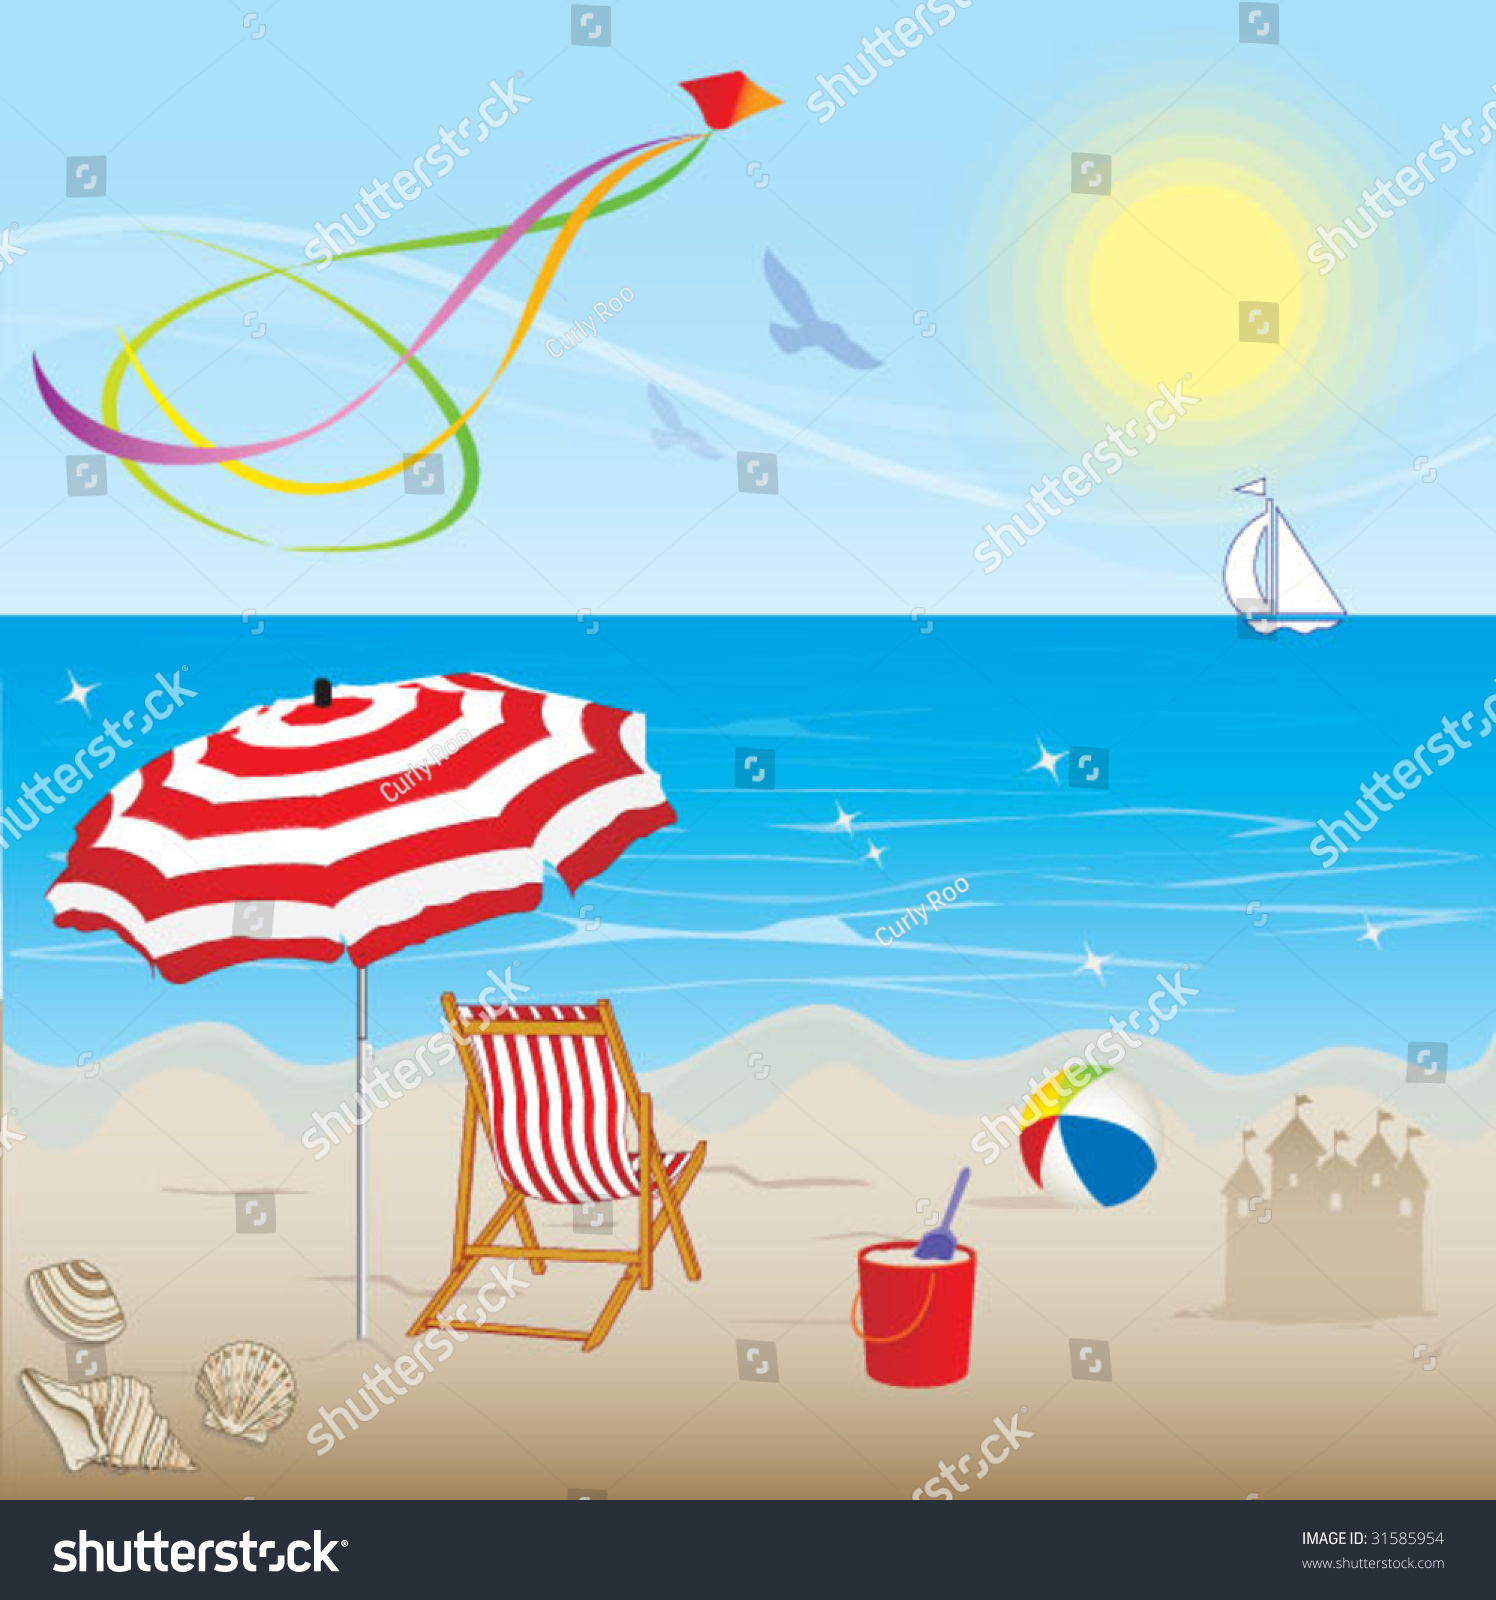 clipart pictures of summer season - photo #20